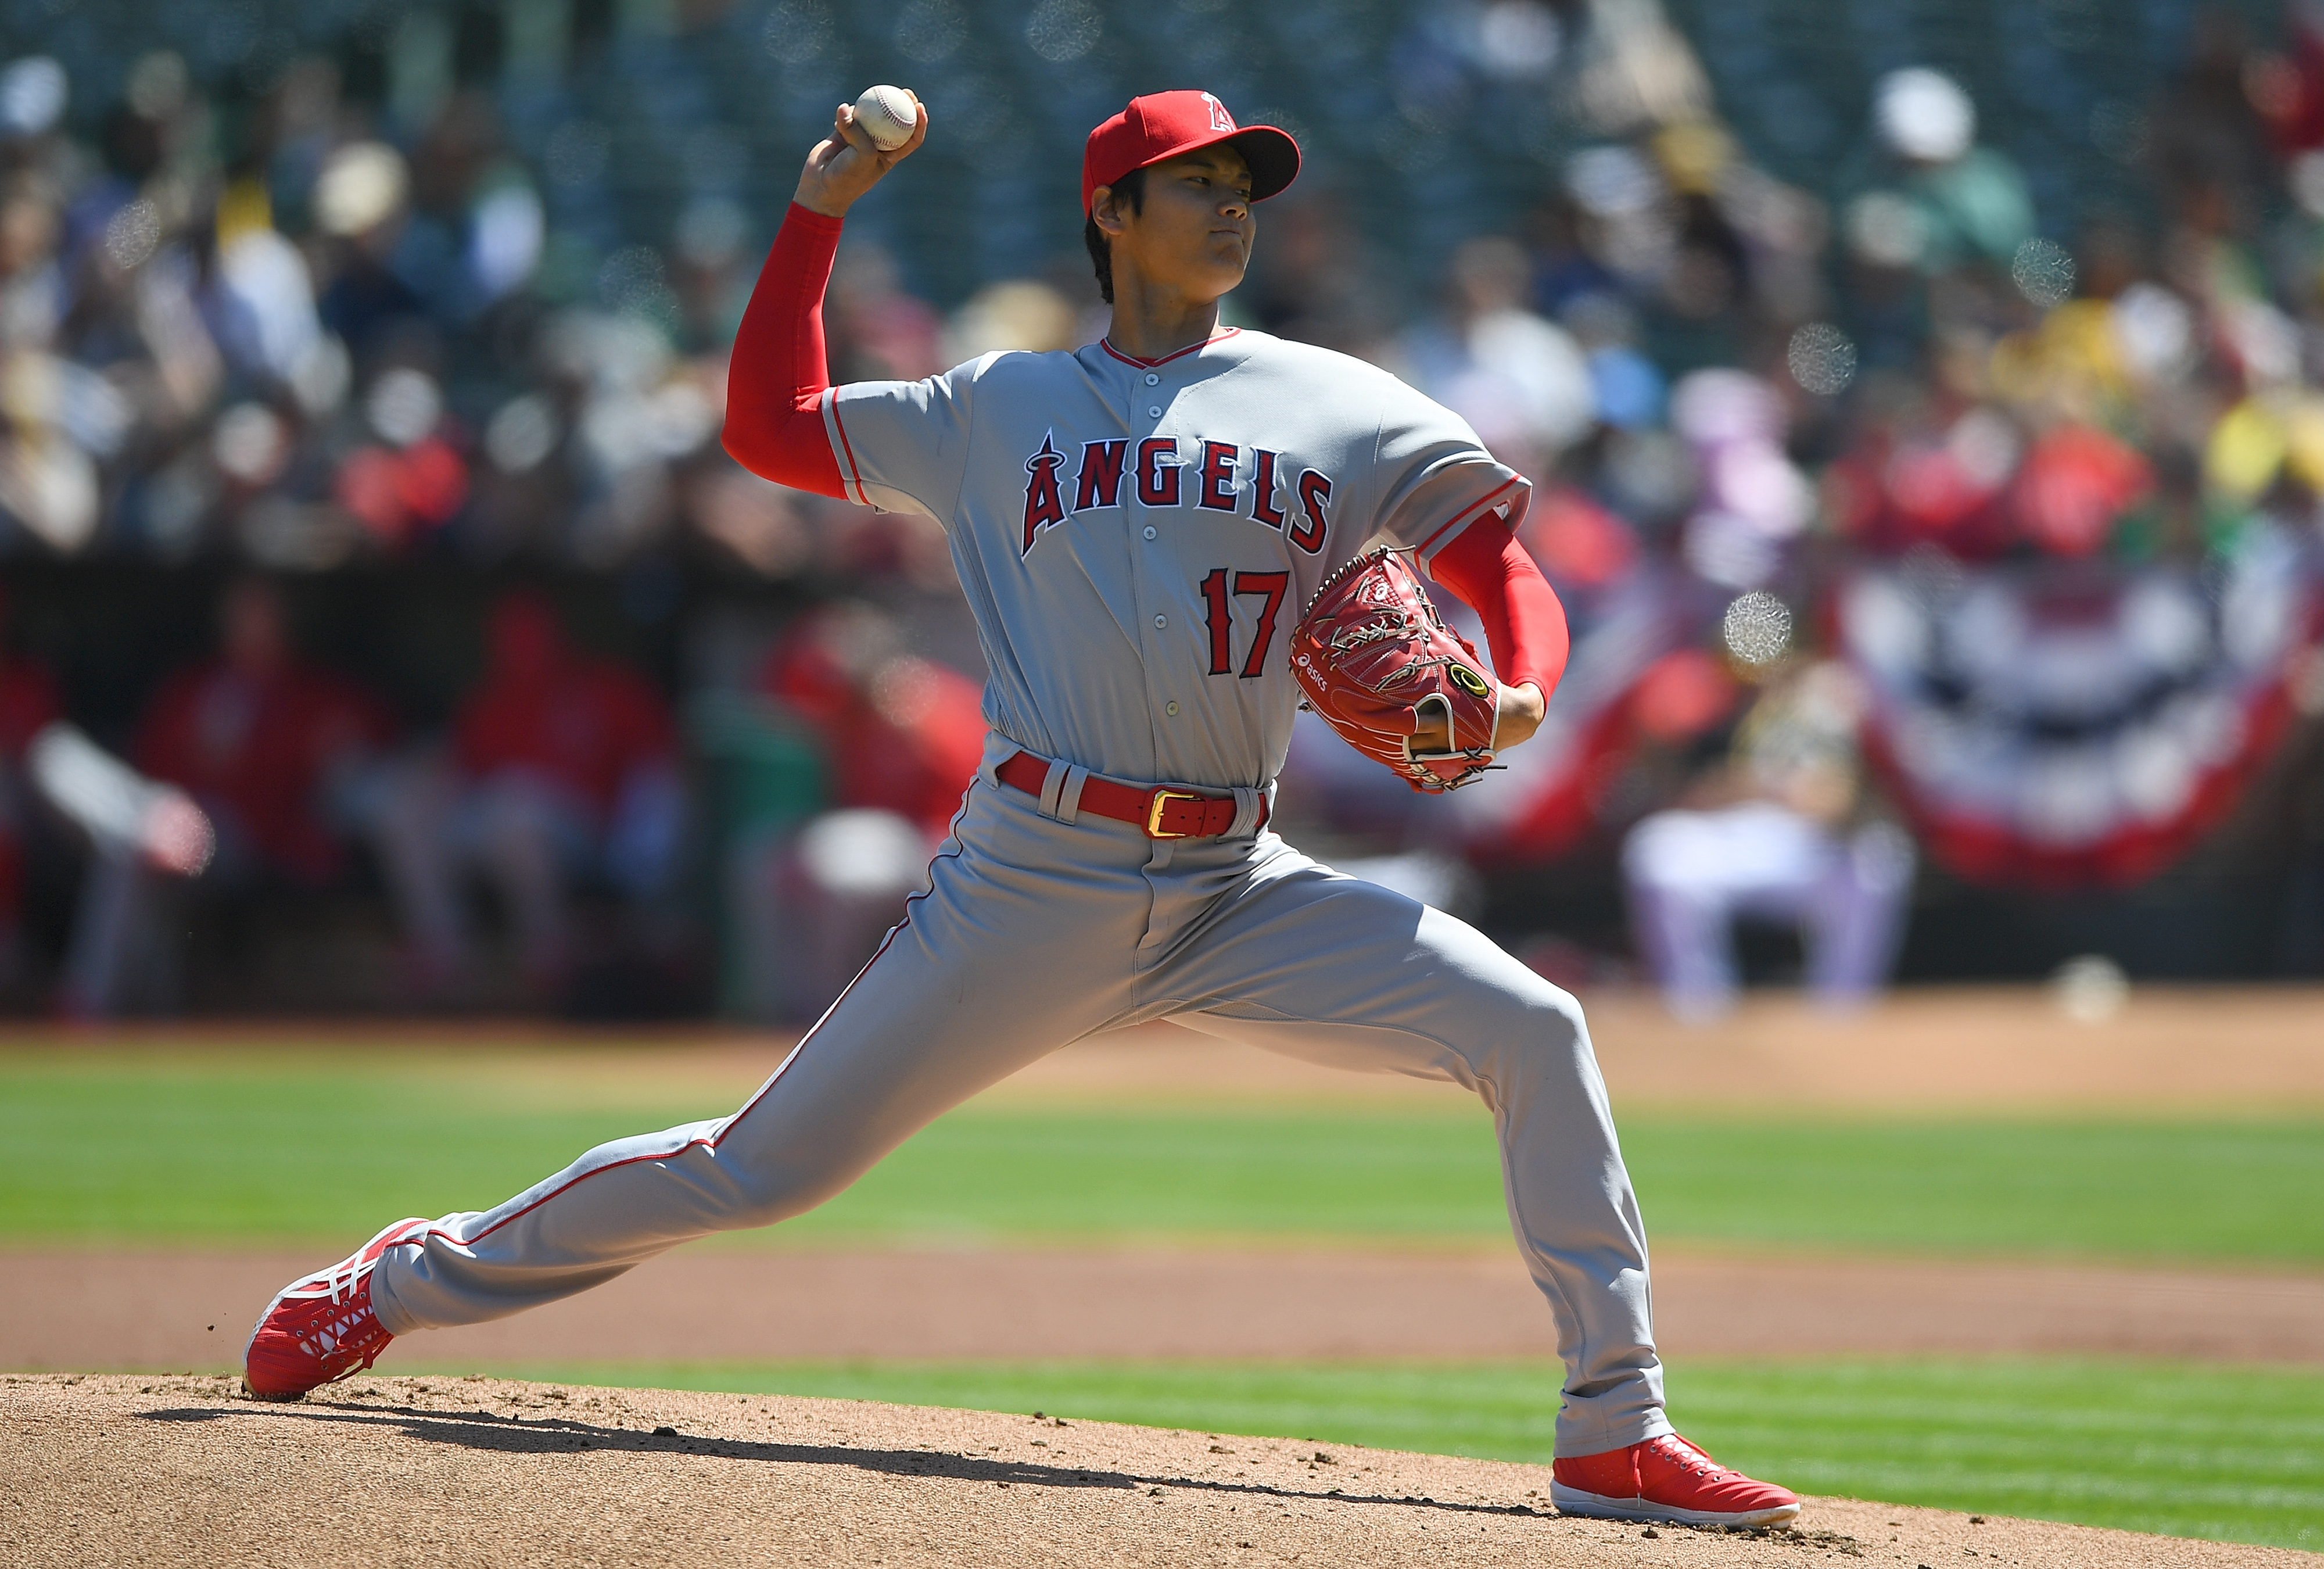 Just Like Babe Ruth, Divide Over Shohei Ohtani's Future as TwoWay